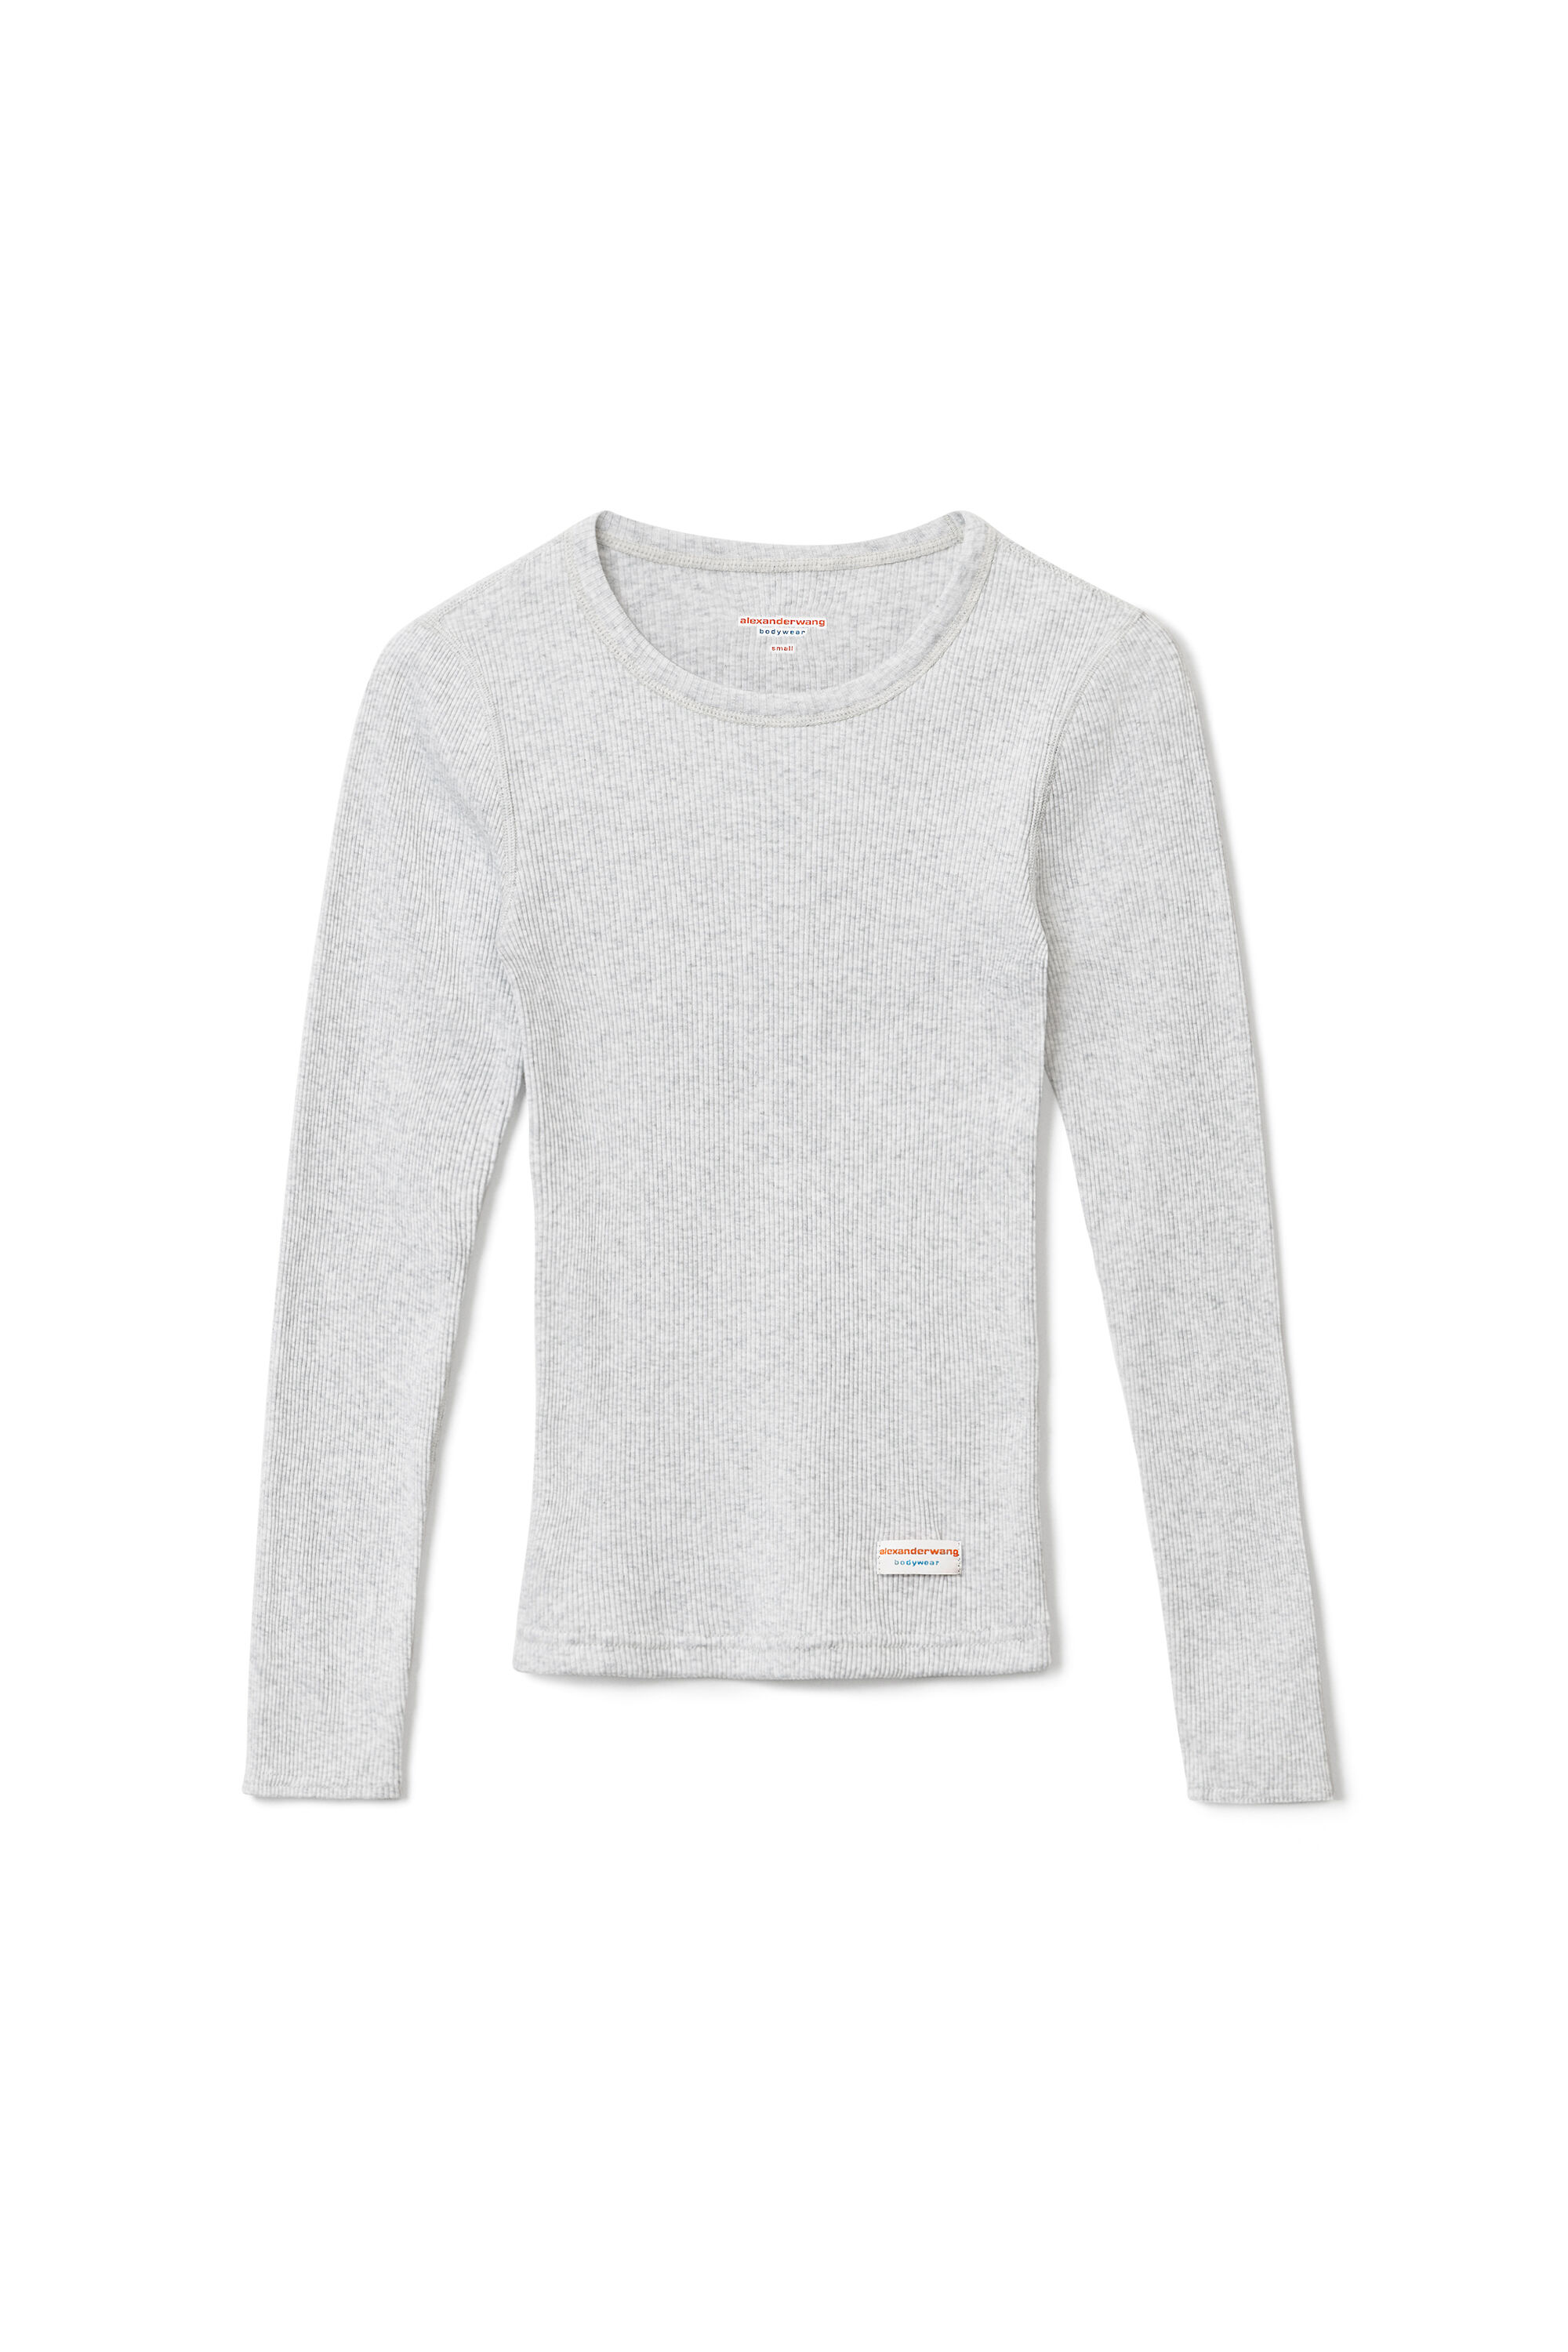 Long-Sleeve Tee in Ribbed Cotton Jersey in HEATHER GREY 